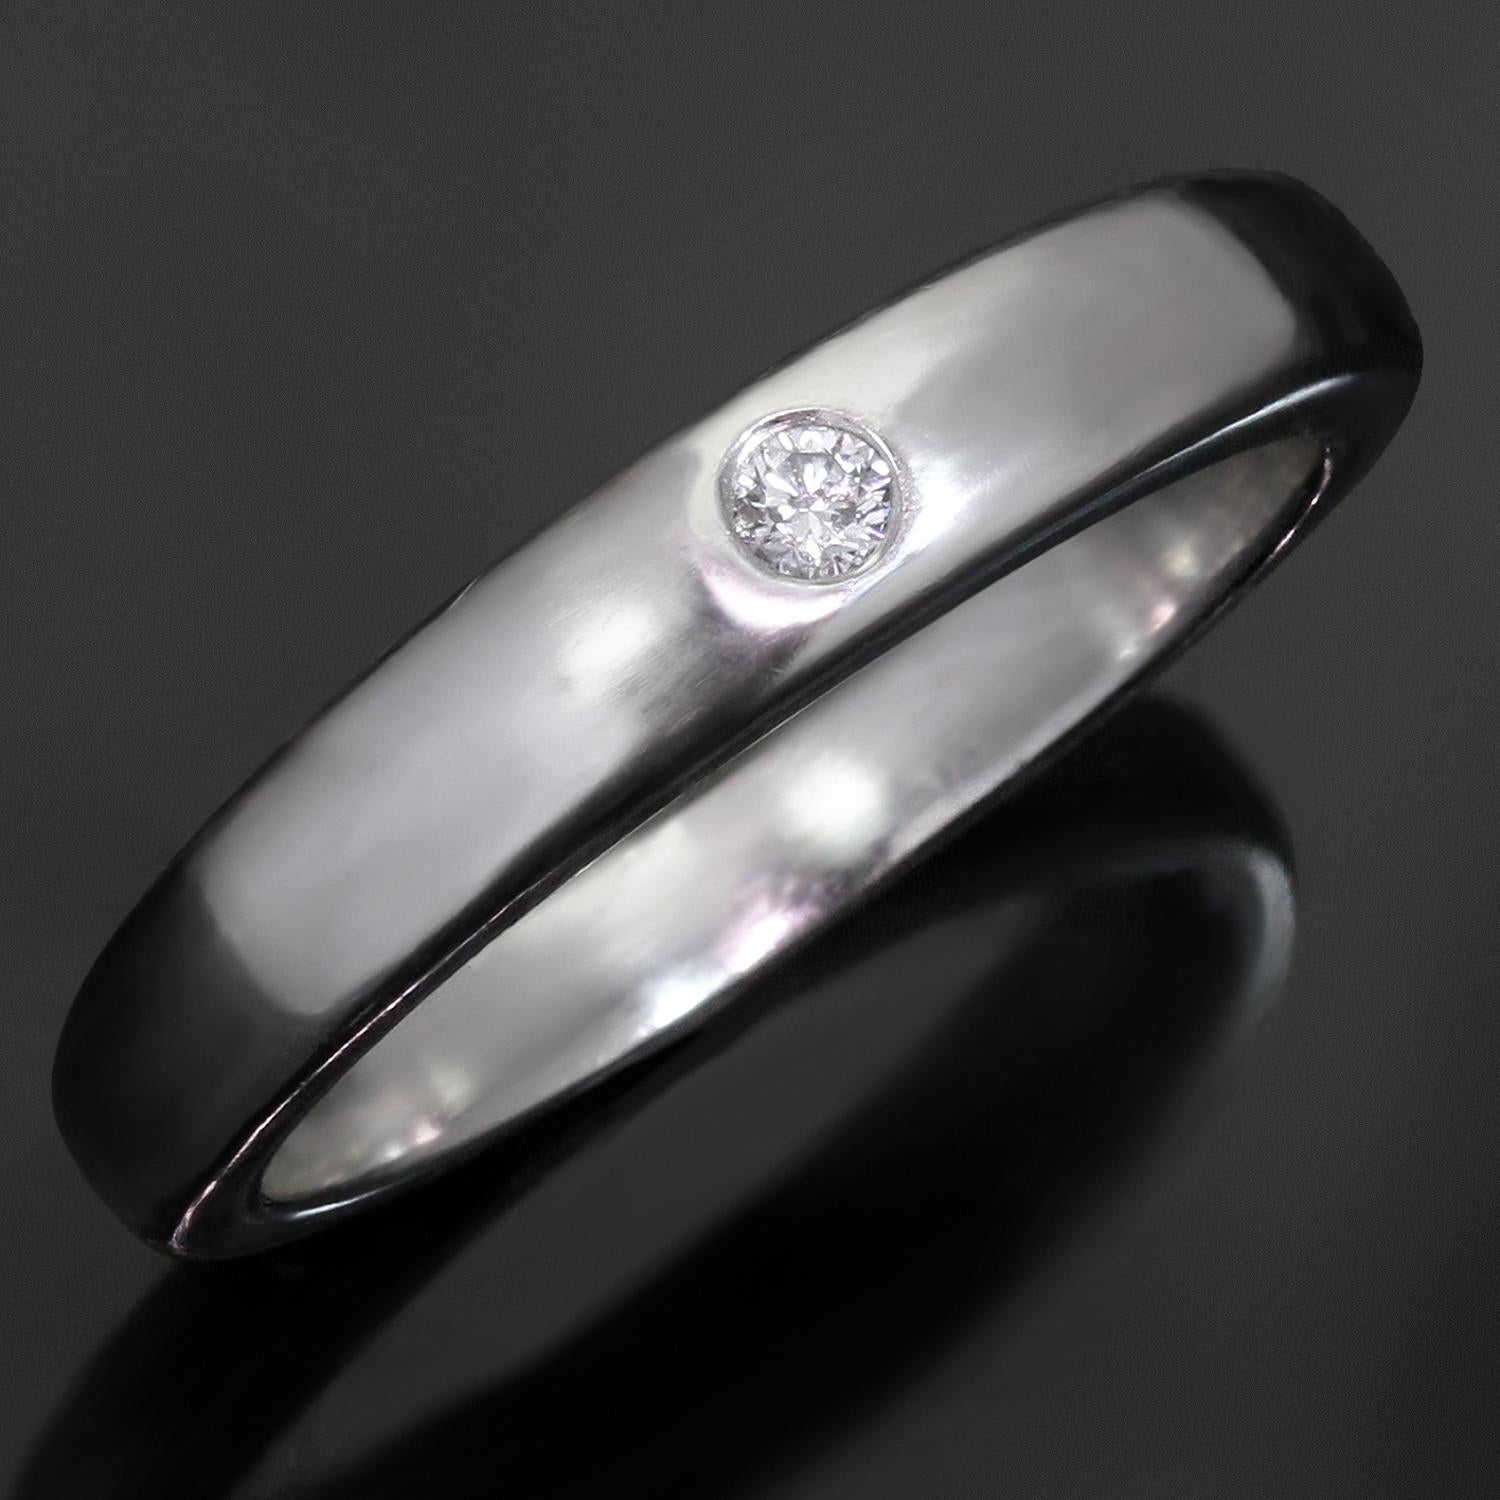 This fabulous Van Cleef & Arpels wedding band from the chic New York collection is crafted in polished platinum and accented with a solitaire round brilliant-cut E-F VVS1-VVS2 diamond weighing an estimated 5.0 carats. The Maison’s calligraphy